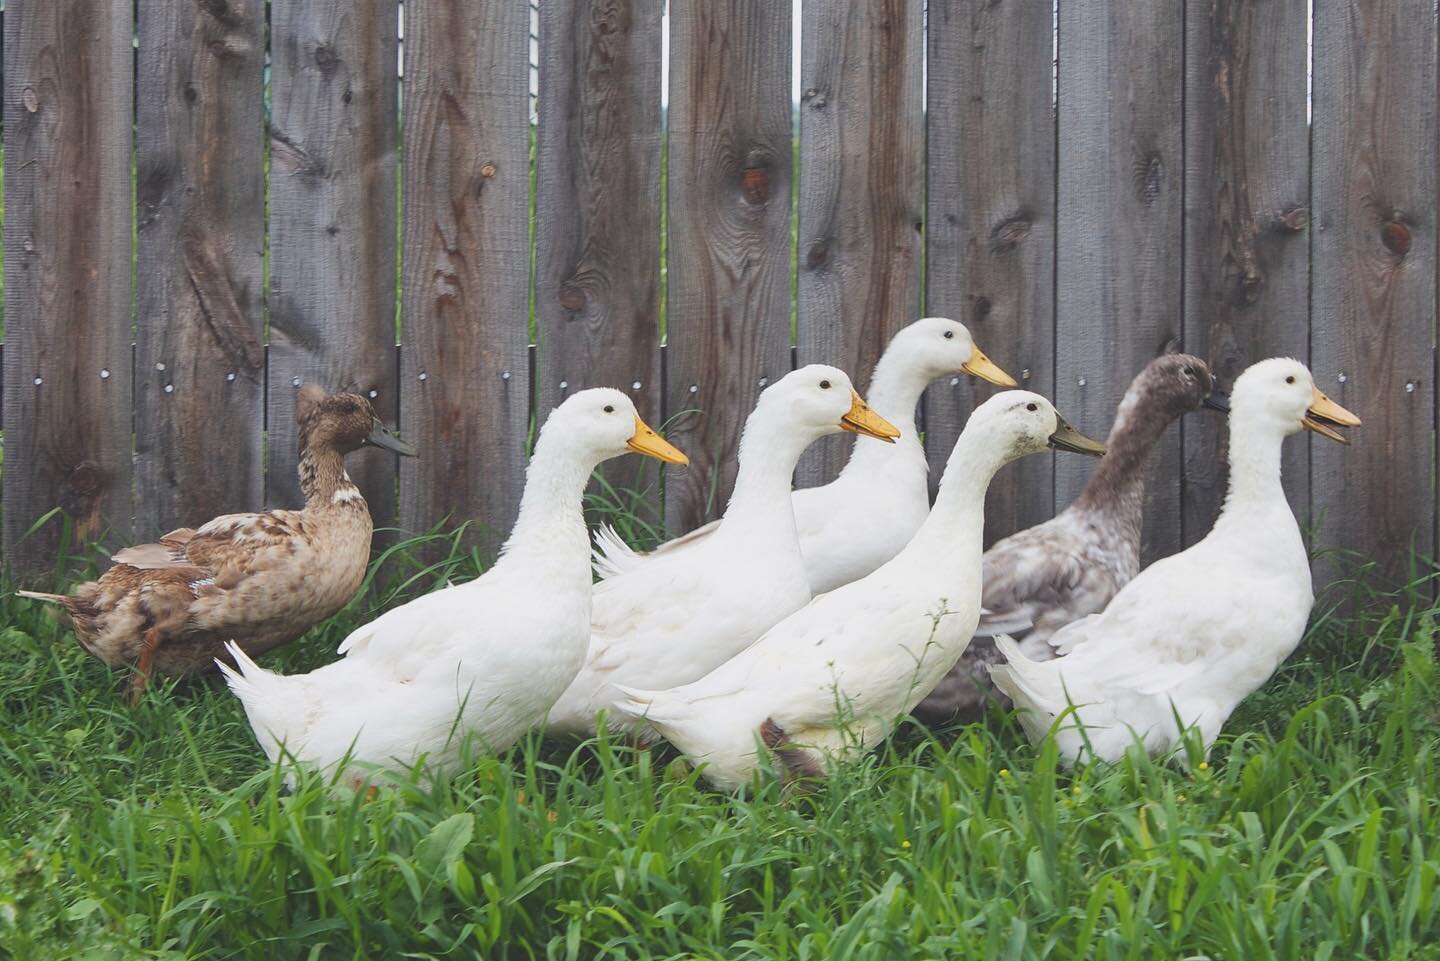 our adopted ducks still won&rsquo;t let me within 6 feet unless I&rsquo;m giving them grain in the morning, but I&rsquo;ll never stop trying to befriend them! I love them all but the crested brown duck in back is hard to beat. Fingers crossed the duc